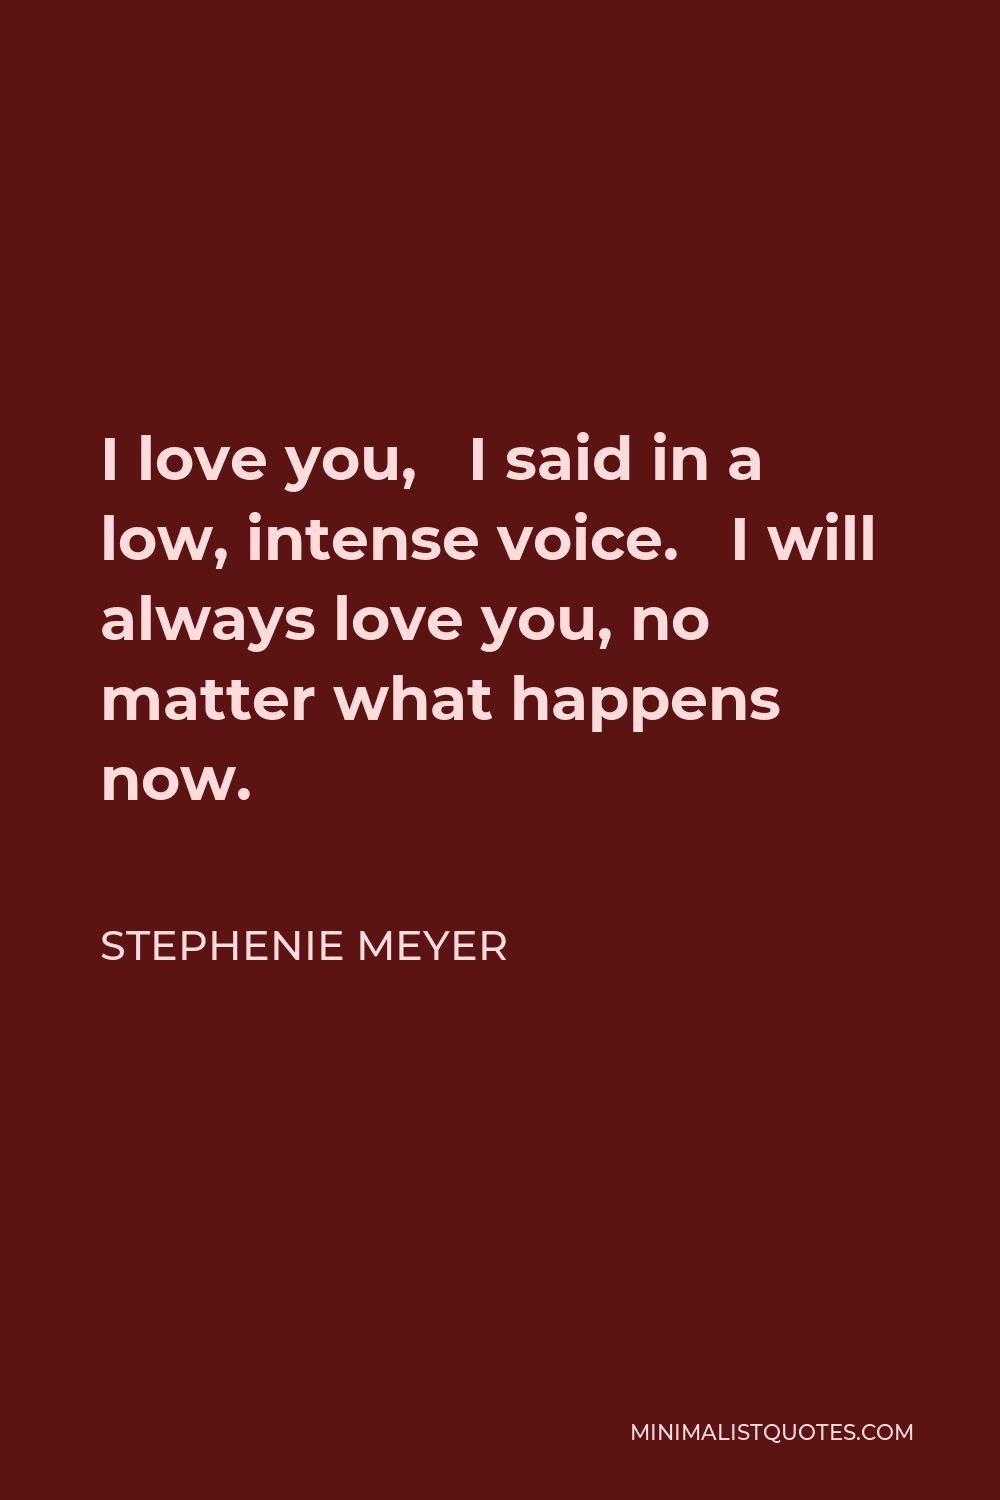 Stephenie Meyer Quote - I love you, I said in a low, intense voice. I will always love you, no matter what happens now.